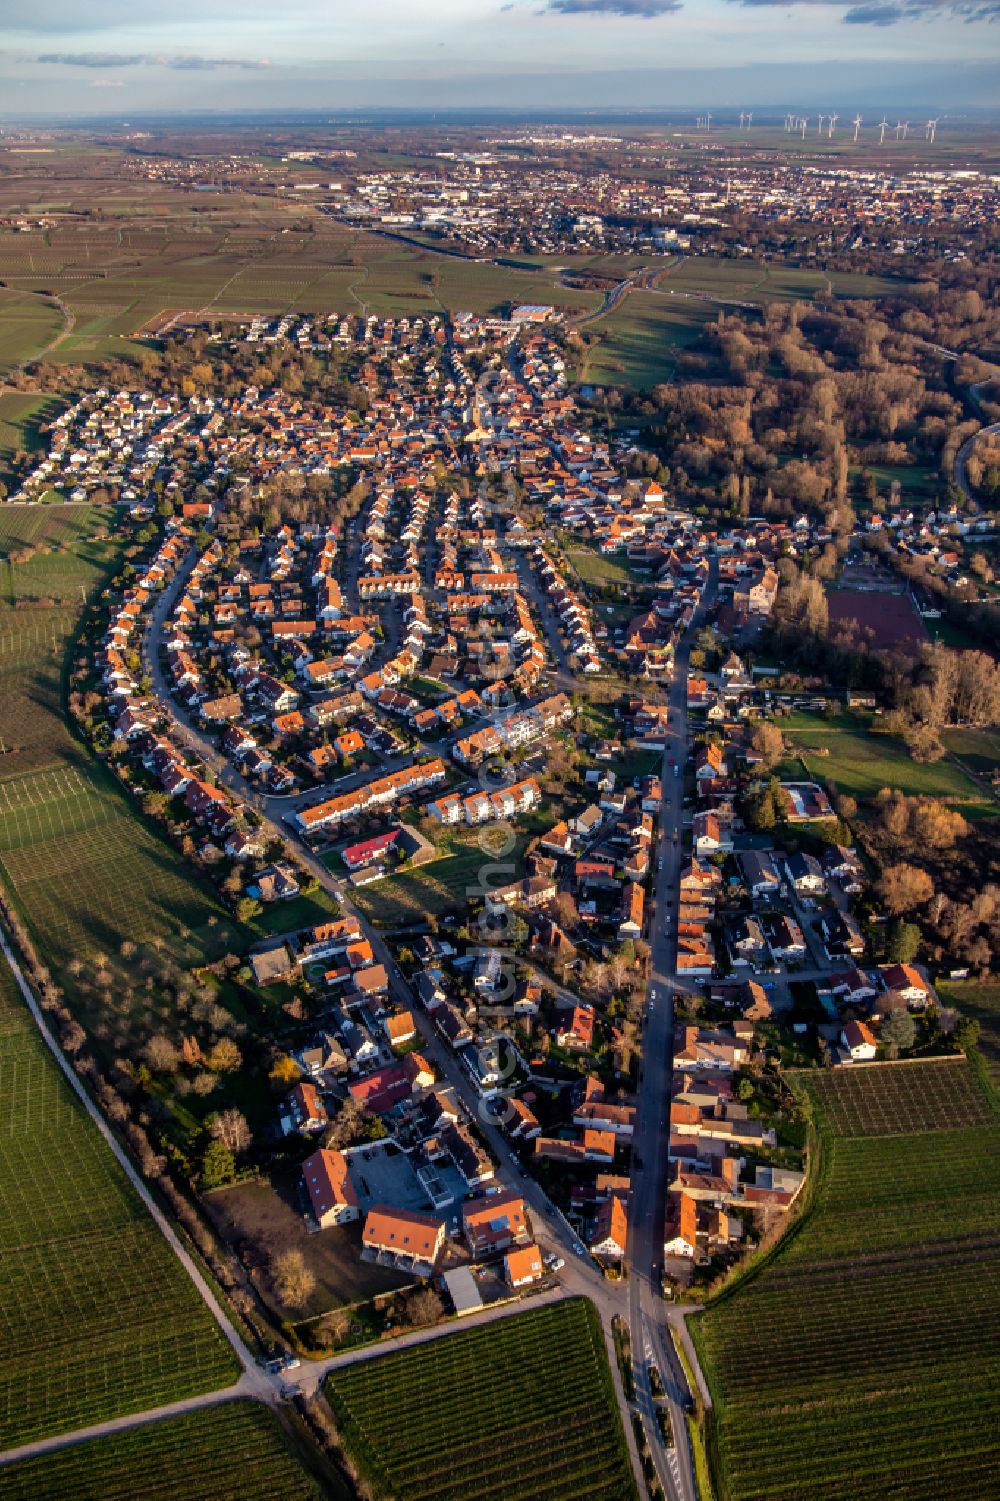 Godramstein from the bird's eye view: Urban area with outskirts and inner city area on the edge of agricultural fields and arable land in Godramstein in the state Rhineland-Palatinate, Germany